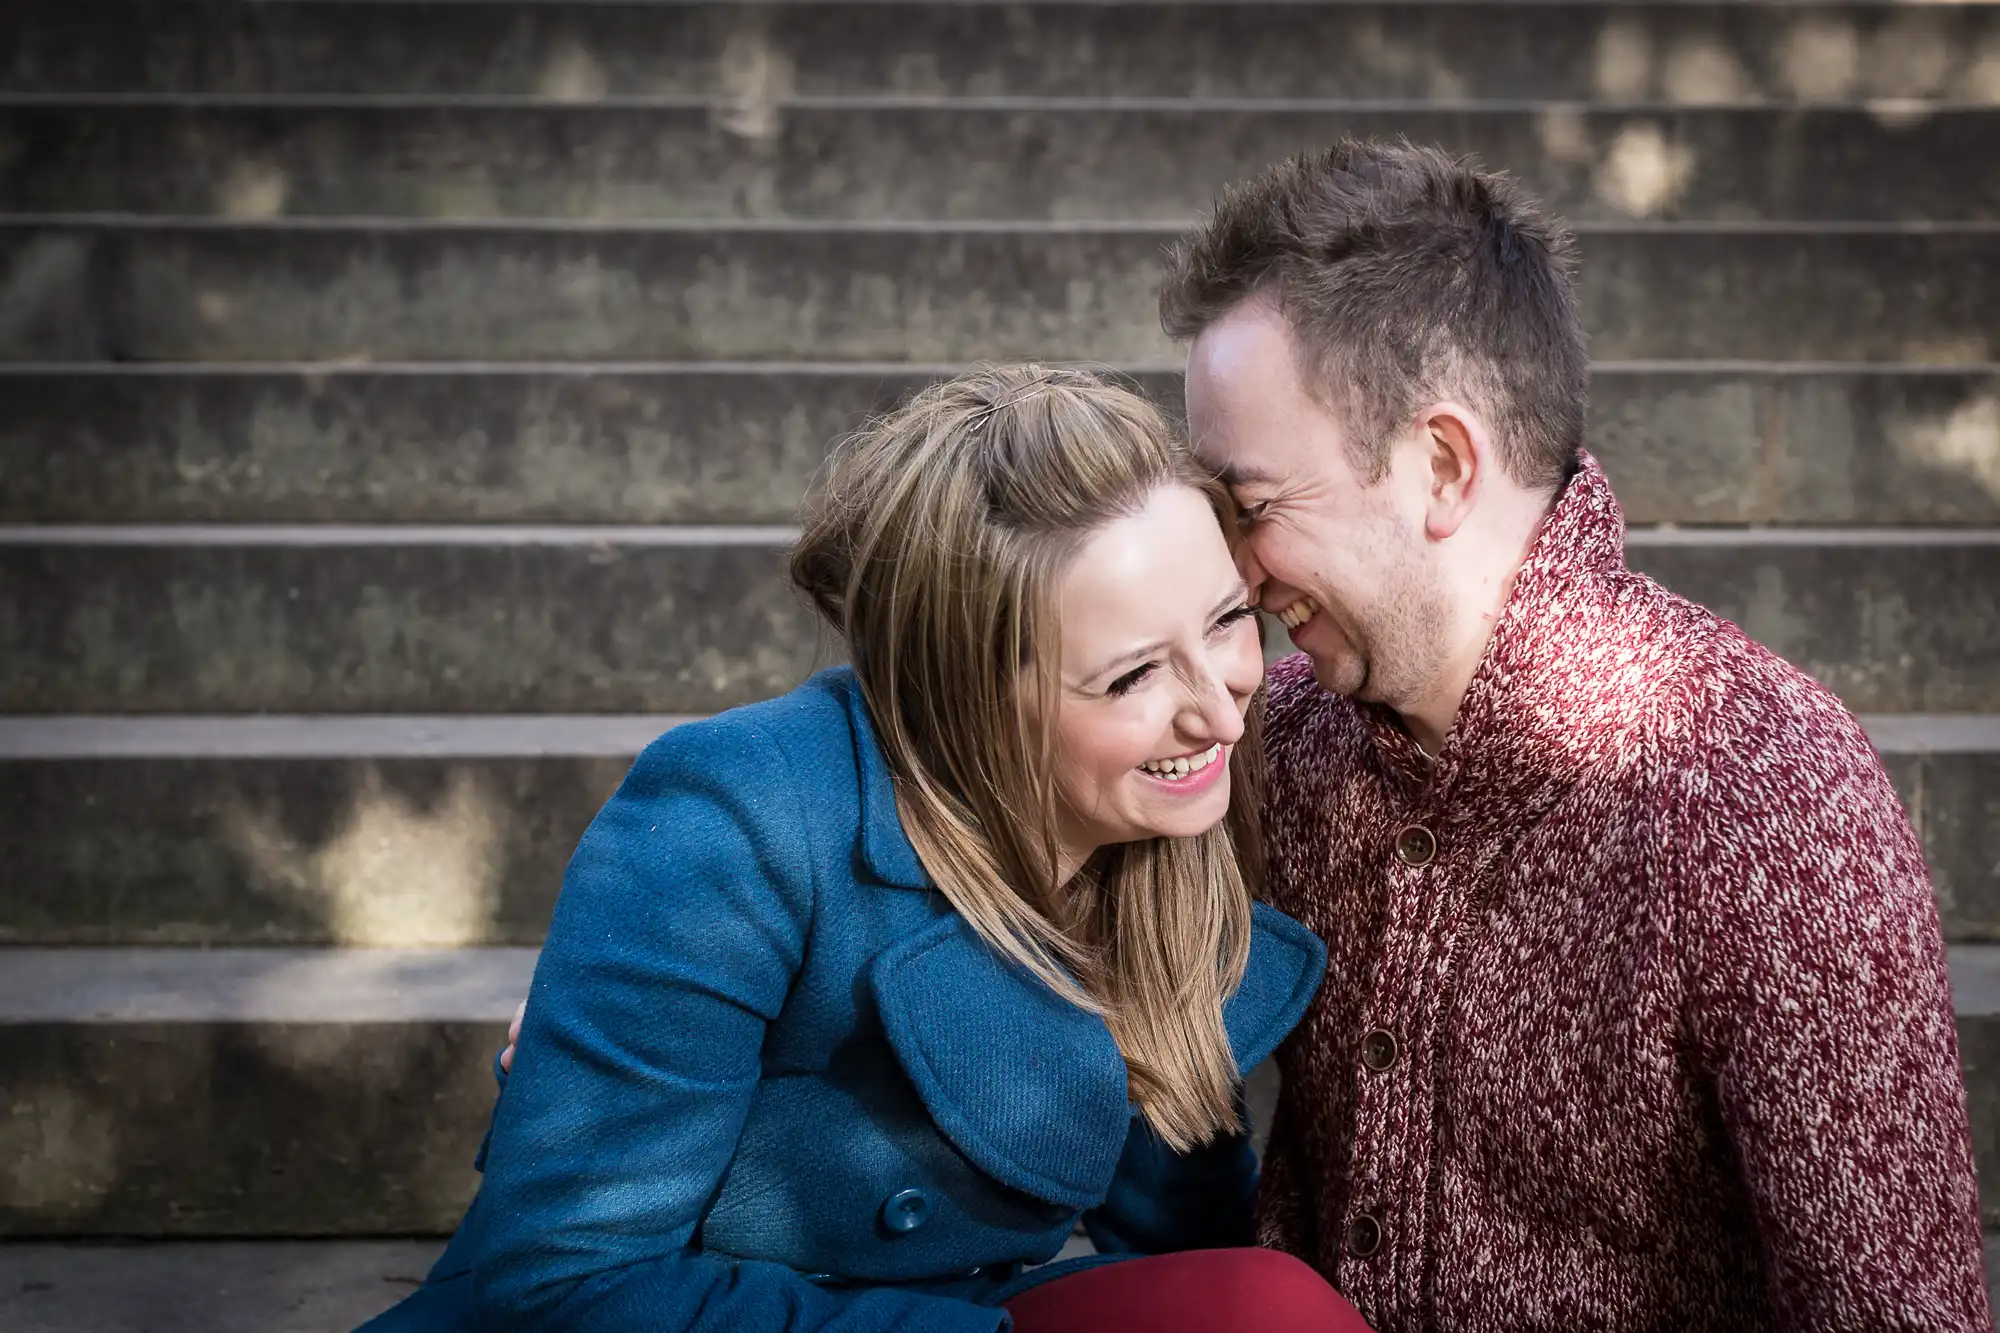 A joyful couple sitting closely and laughing together on outdoor steps. both are dressed in warm, casual clothing.